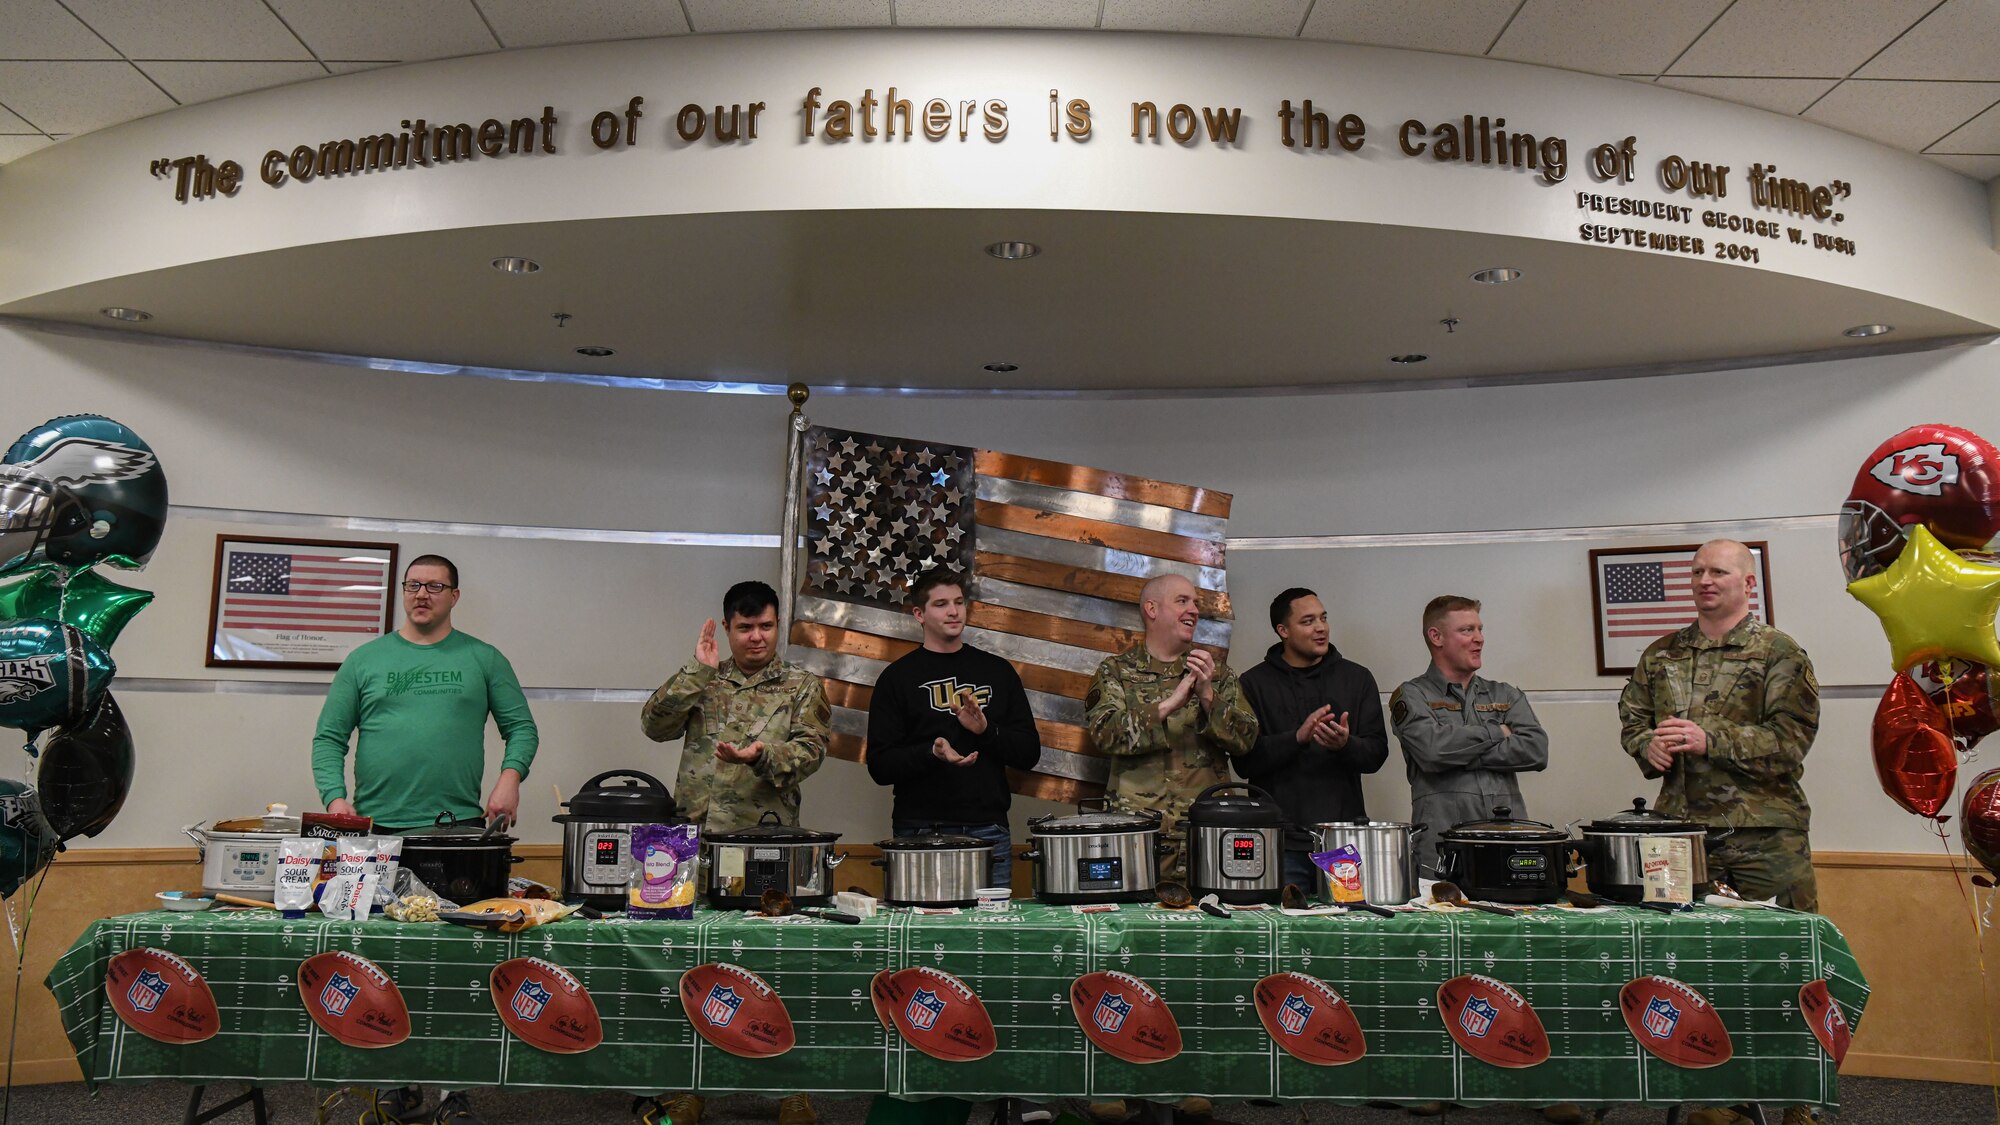 Seven individuals applaud at a chili cook-off event